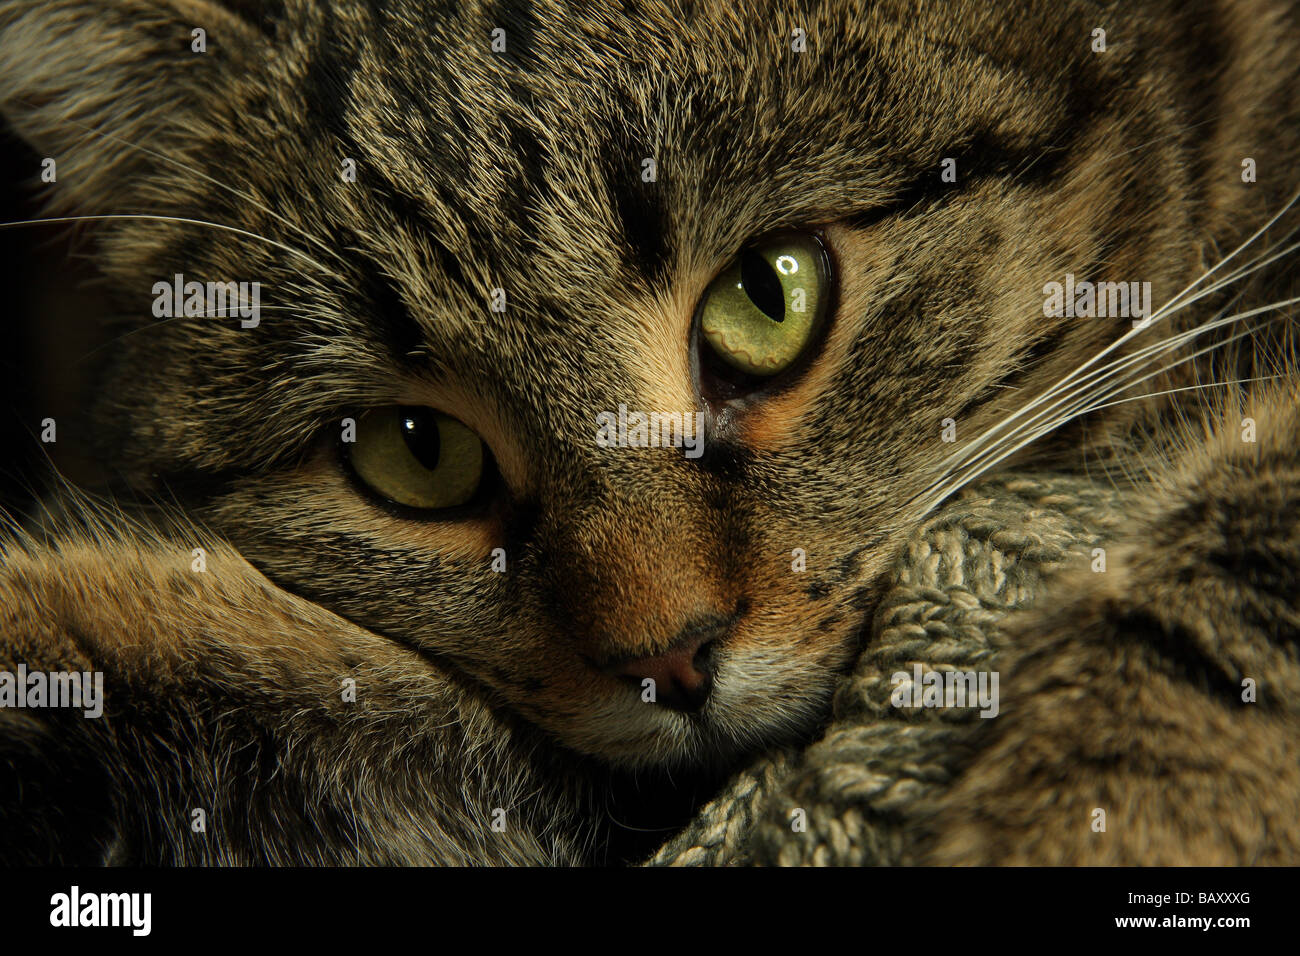 close up of a young tabby cat with its head resting on a pullover good eye contact Stock Photo